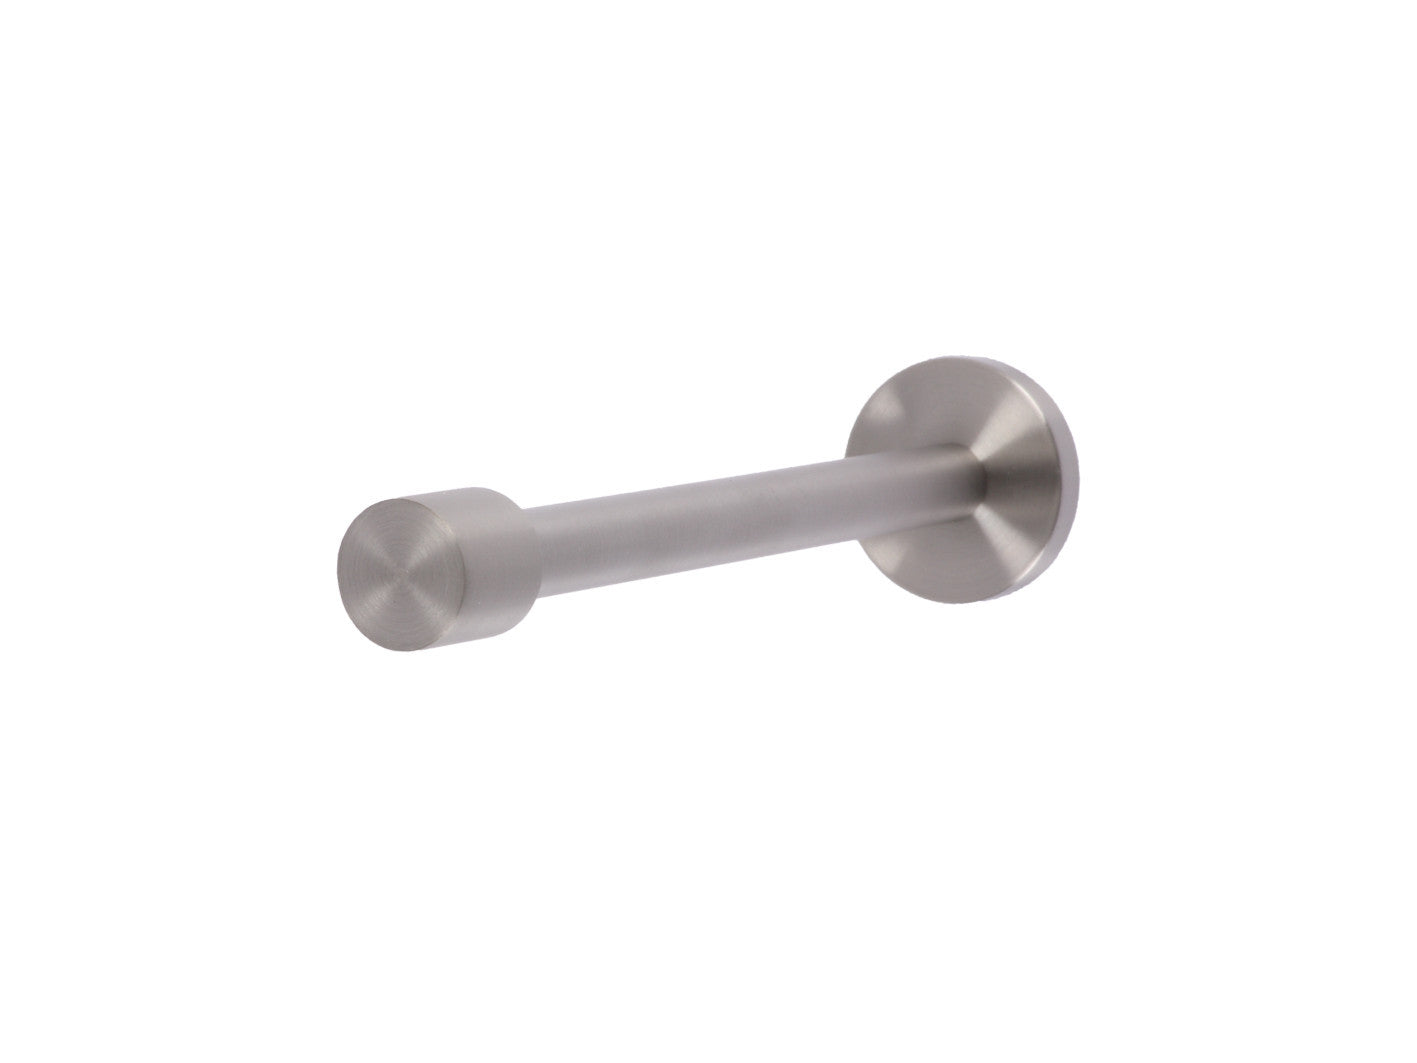 Stainless steel curtain hold back - collar shape | Walcot House